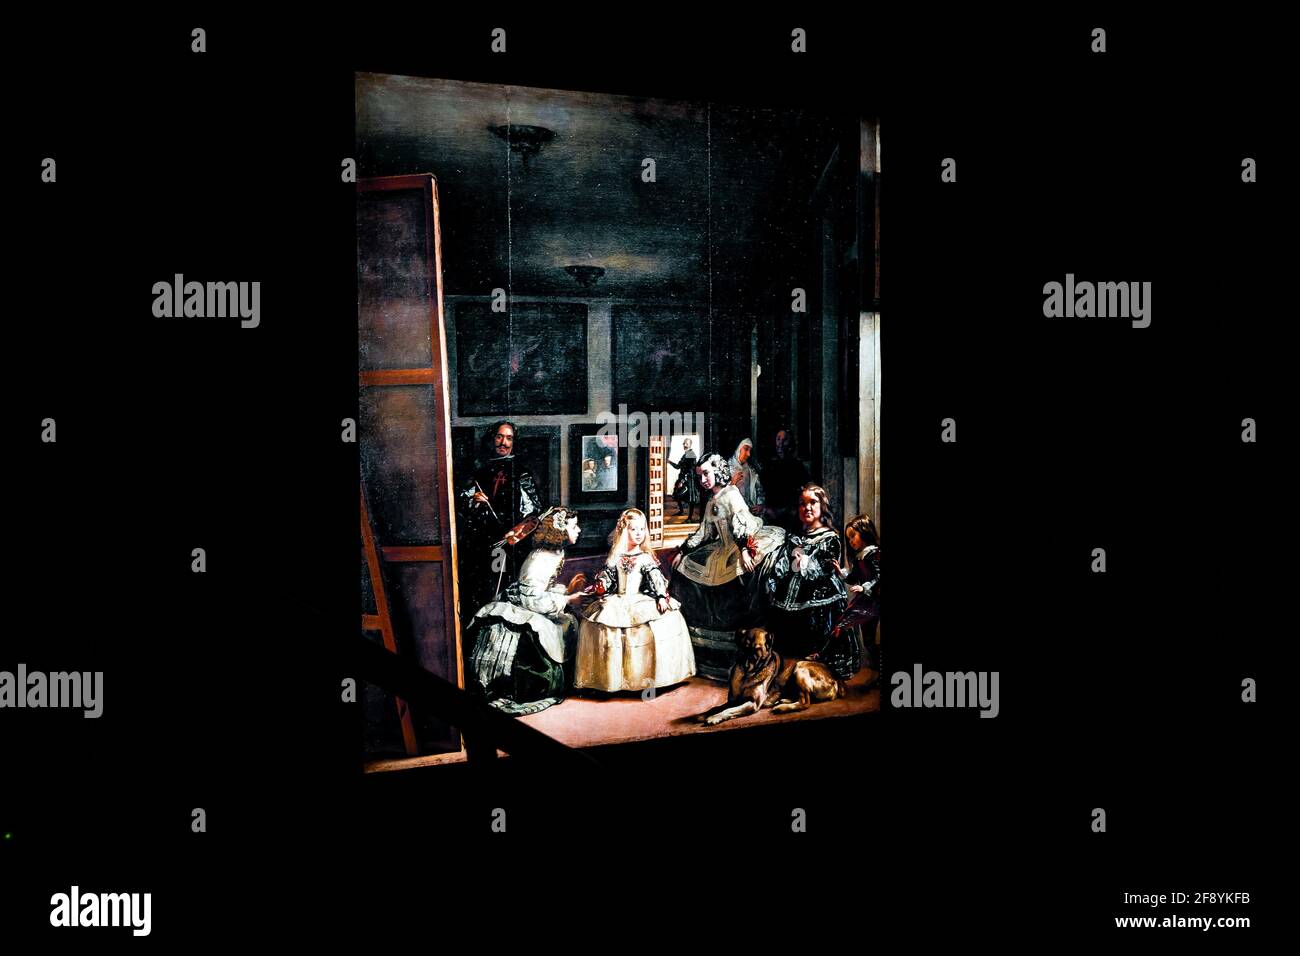 Recreation of the painting 'Las Meninas' by Diego Velázquez at the Velázques Tech during the inauguration.Within the framework of World Art Day the Interactive Museum of Velázquez, 'Velázquez tech' located on Calle Atocha 12, was inaugurated with the intention of being an immersive experience in the art of Diego Velázquez and his Meninas. The museum has 8 rooms with dozens of high-tech projectors, where you can experience different ways of appreciating the art and history of this seventeenth-century Spanish painter who is recognized as one of the greatest exponents of Spanish, European paintin Stock Photo